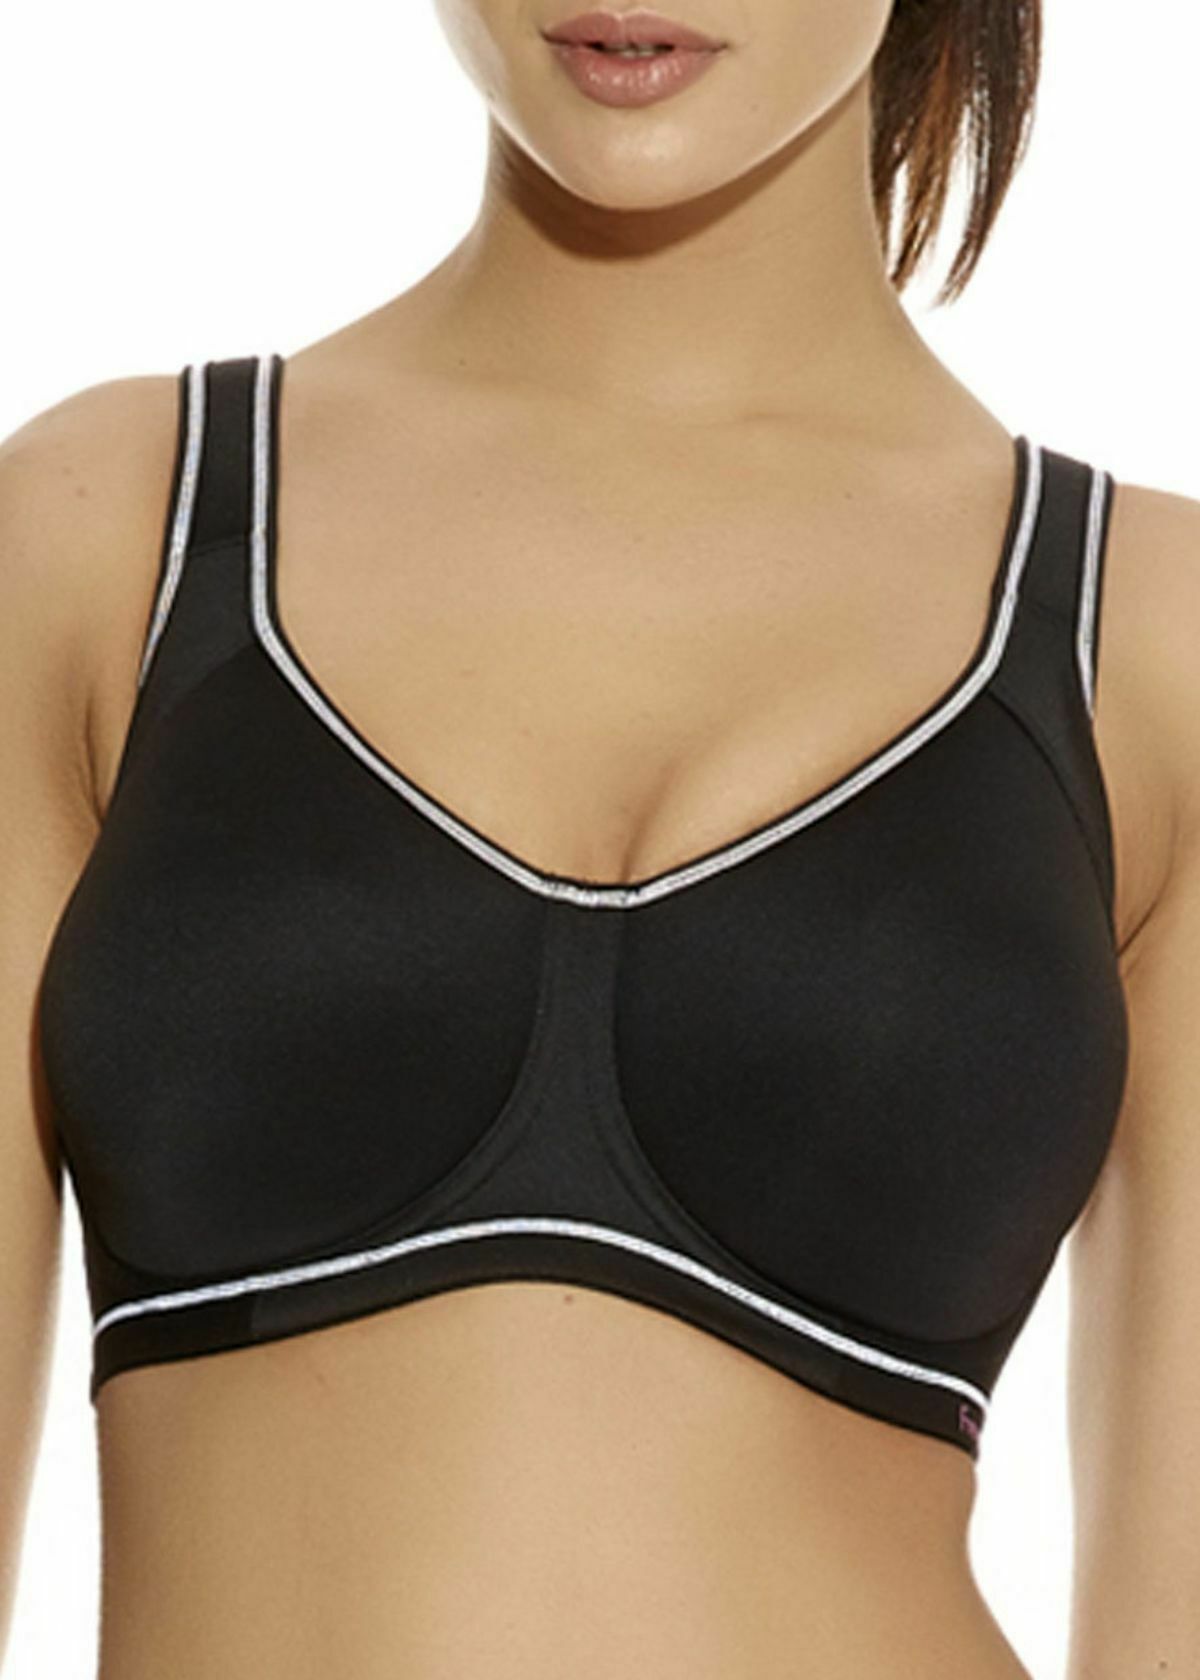 Freya Active Sonic Underwire Moulded Spacer Sports Bra AA4892/AC4892